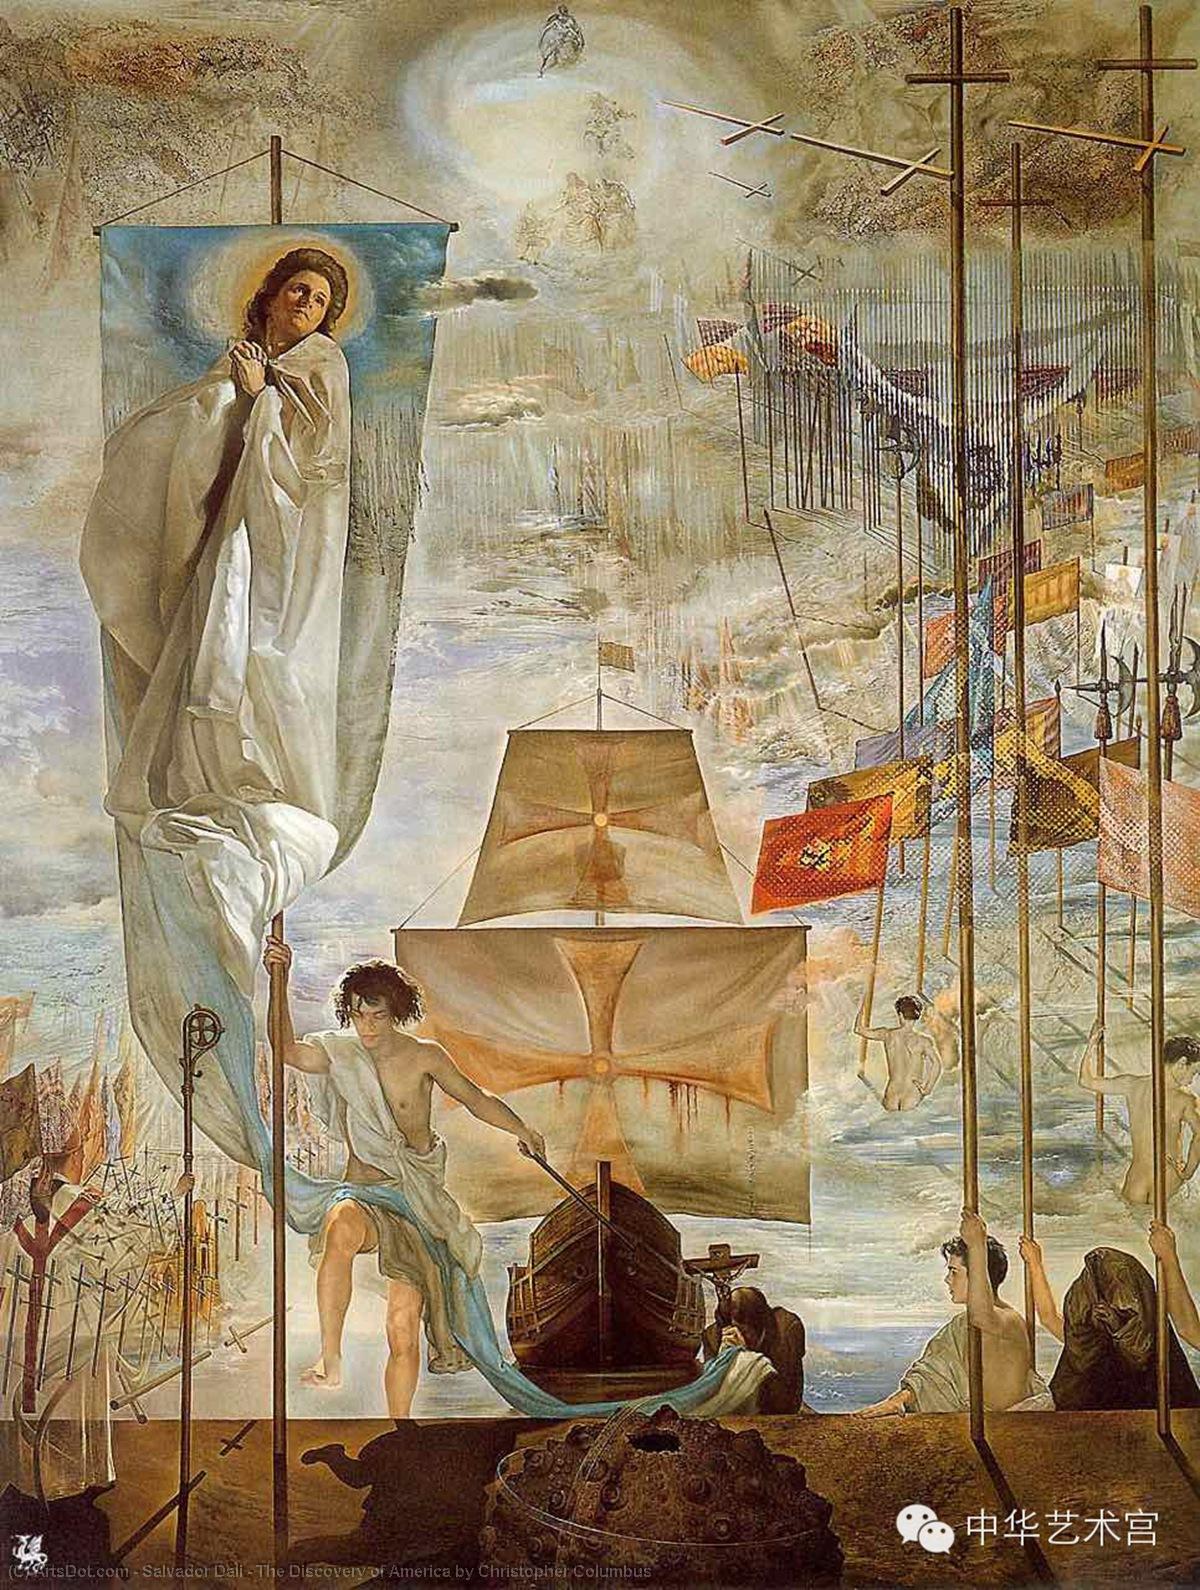 WikiOO.org - Encyclopedia of Fine Arts - Malba, Artwork Salvador Dali - The Discovery of America by Christopher Columbus